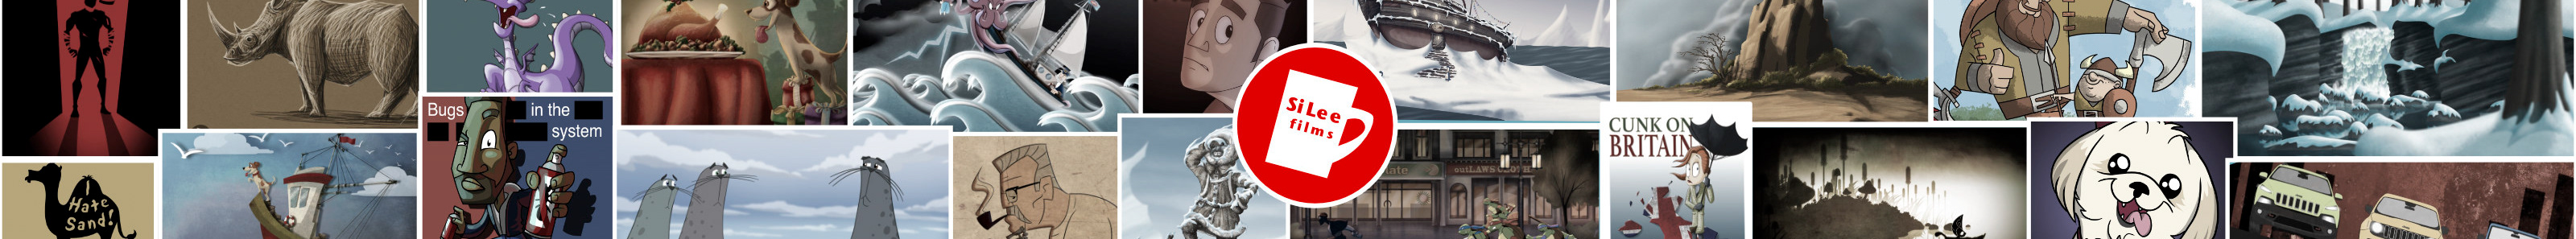 SiLee Films's profile banner